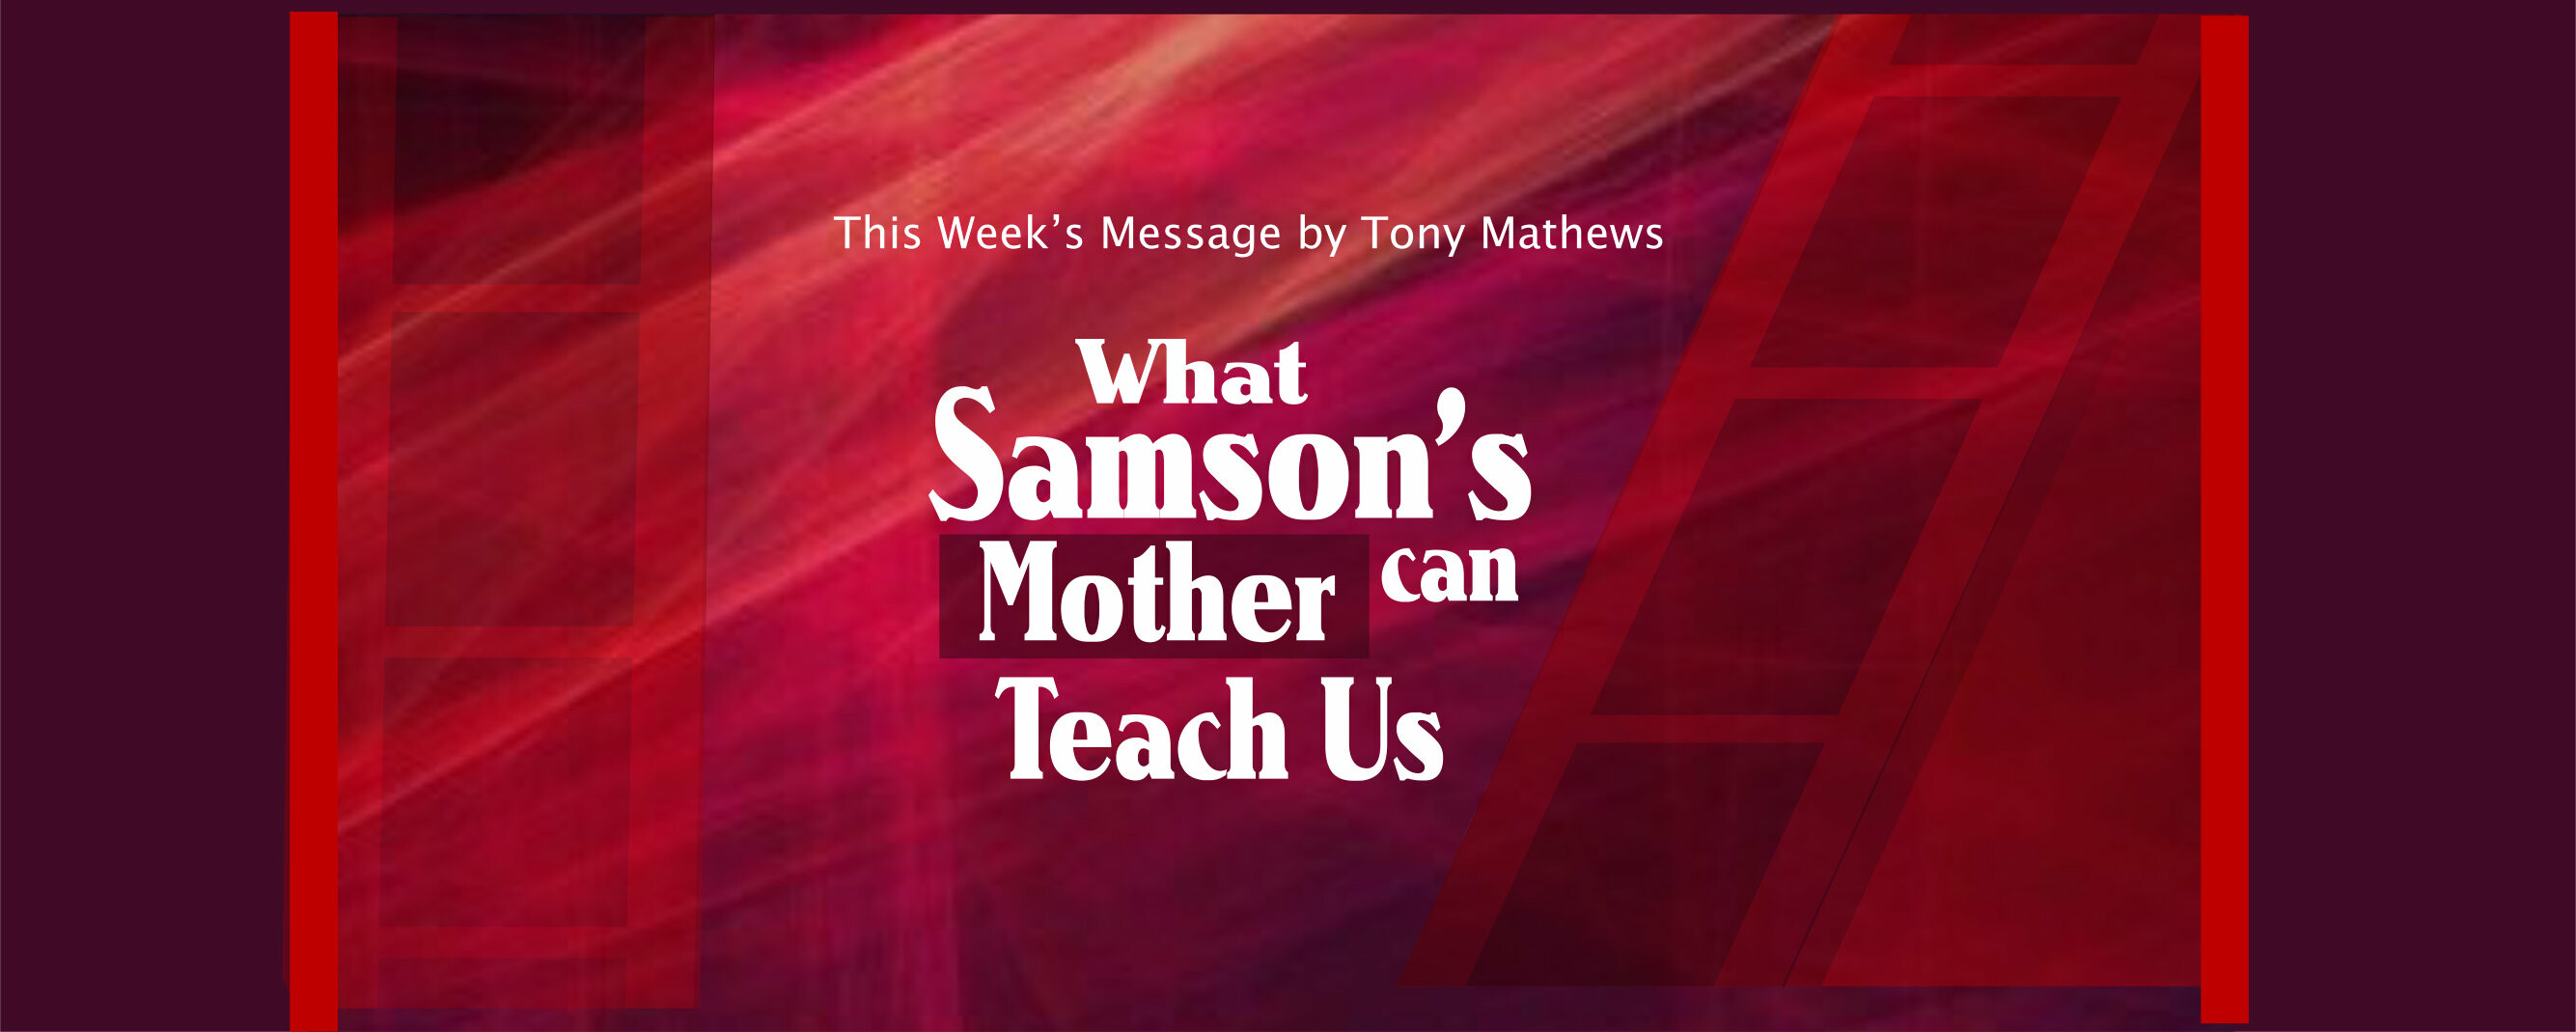 What Samson's Mother Can Teach Us